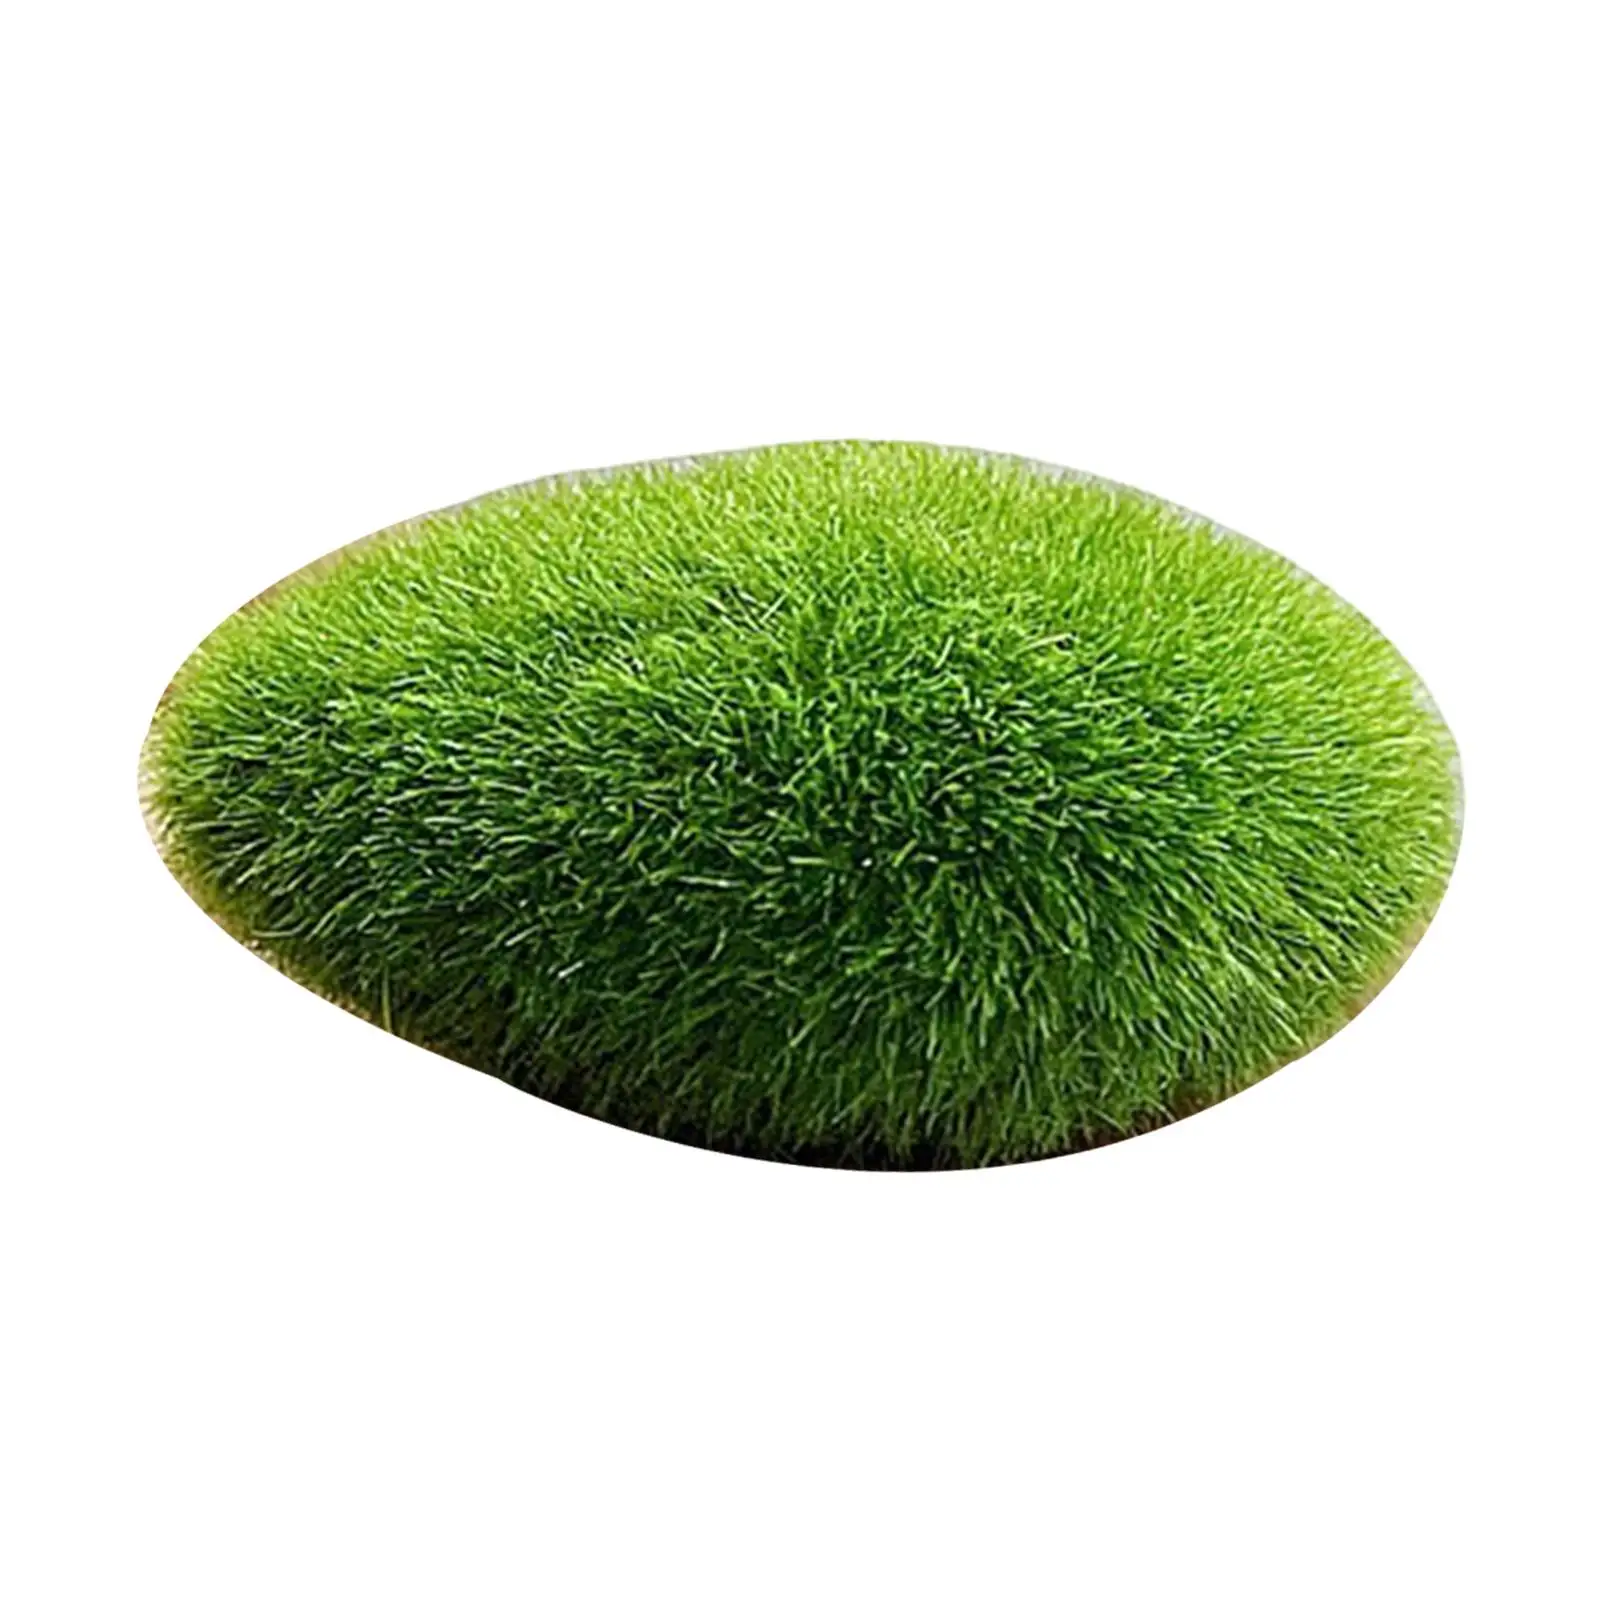 Artificial Moss Rocks Moss Stone Green Moss Balls Bryophytes Decorative Faux for Party Dollhouse Weddings Decorations